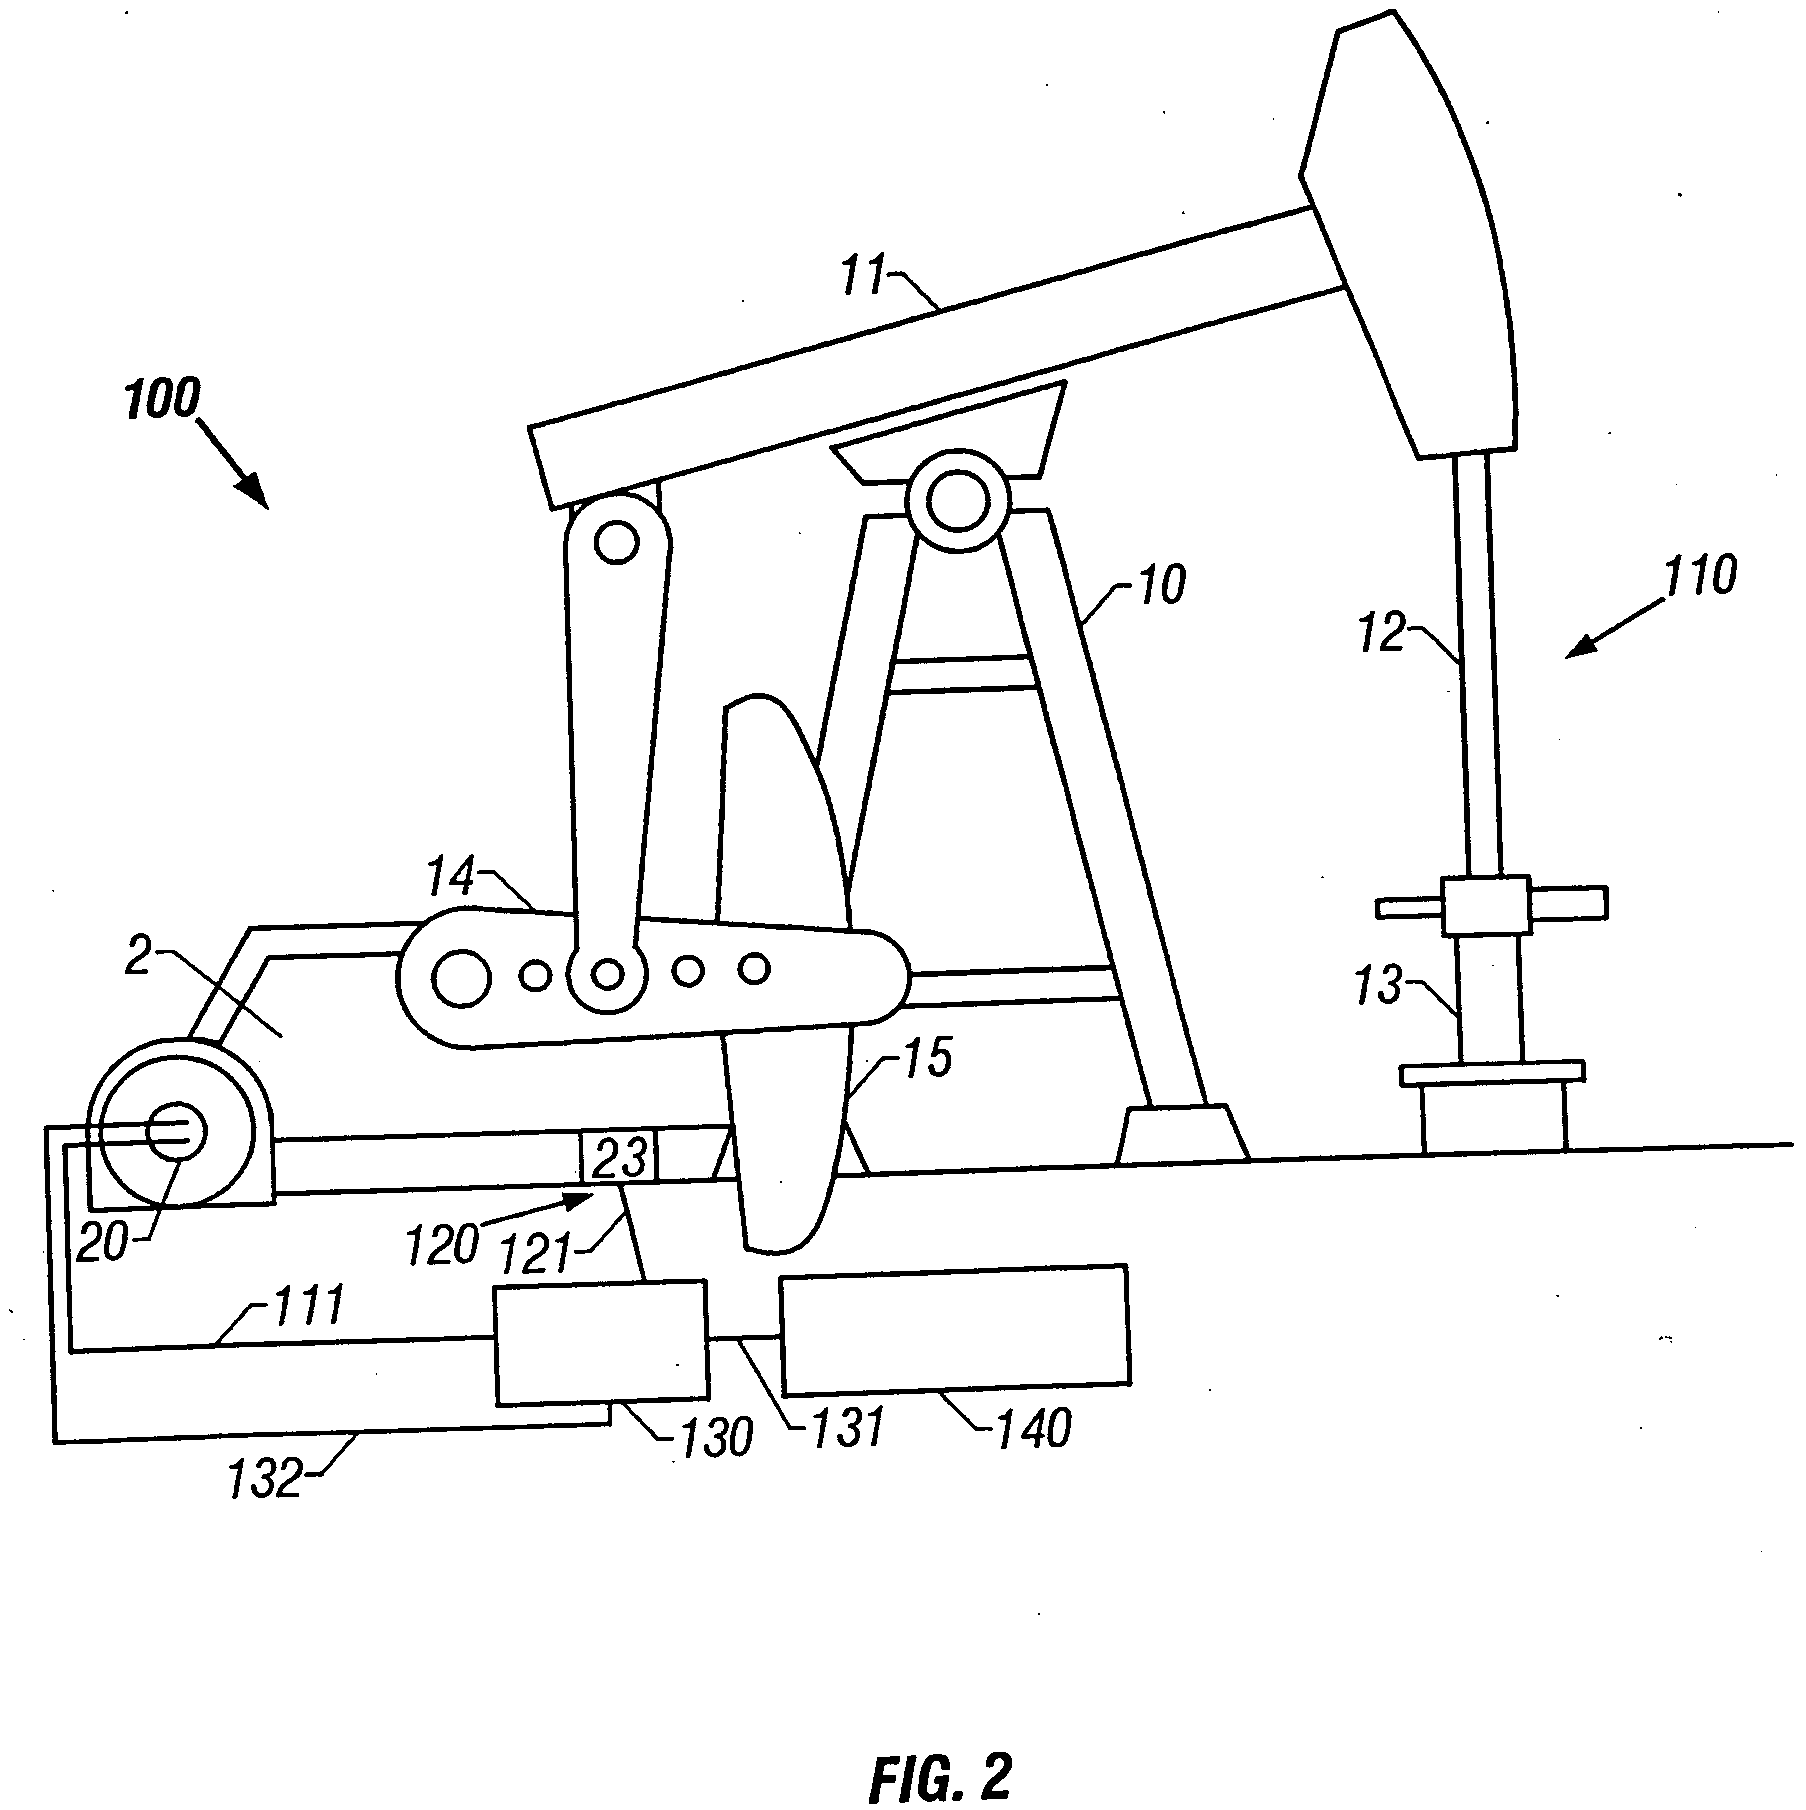 Methods, apparatus and products useful in the operation of a sucker rod pump during the production of hydrocarbons